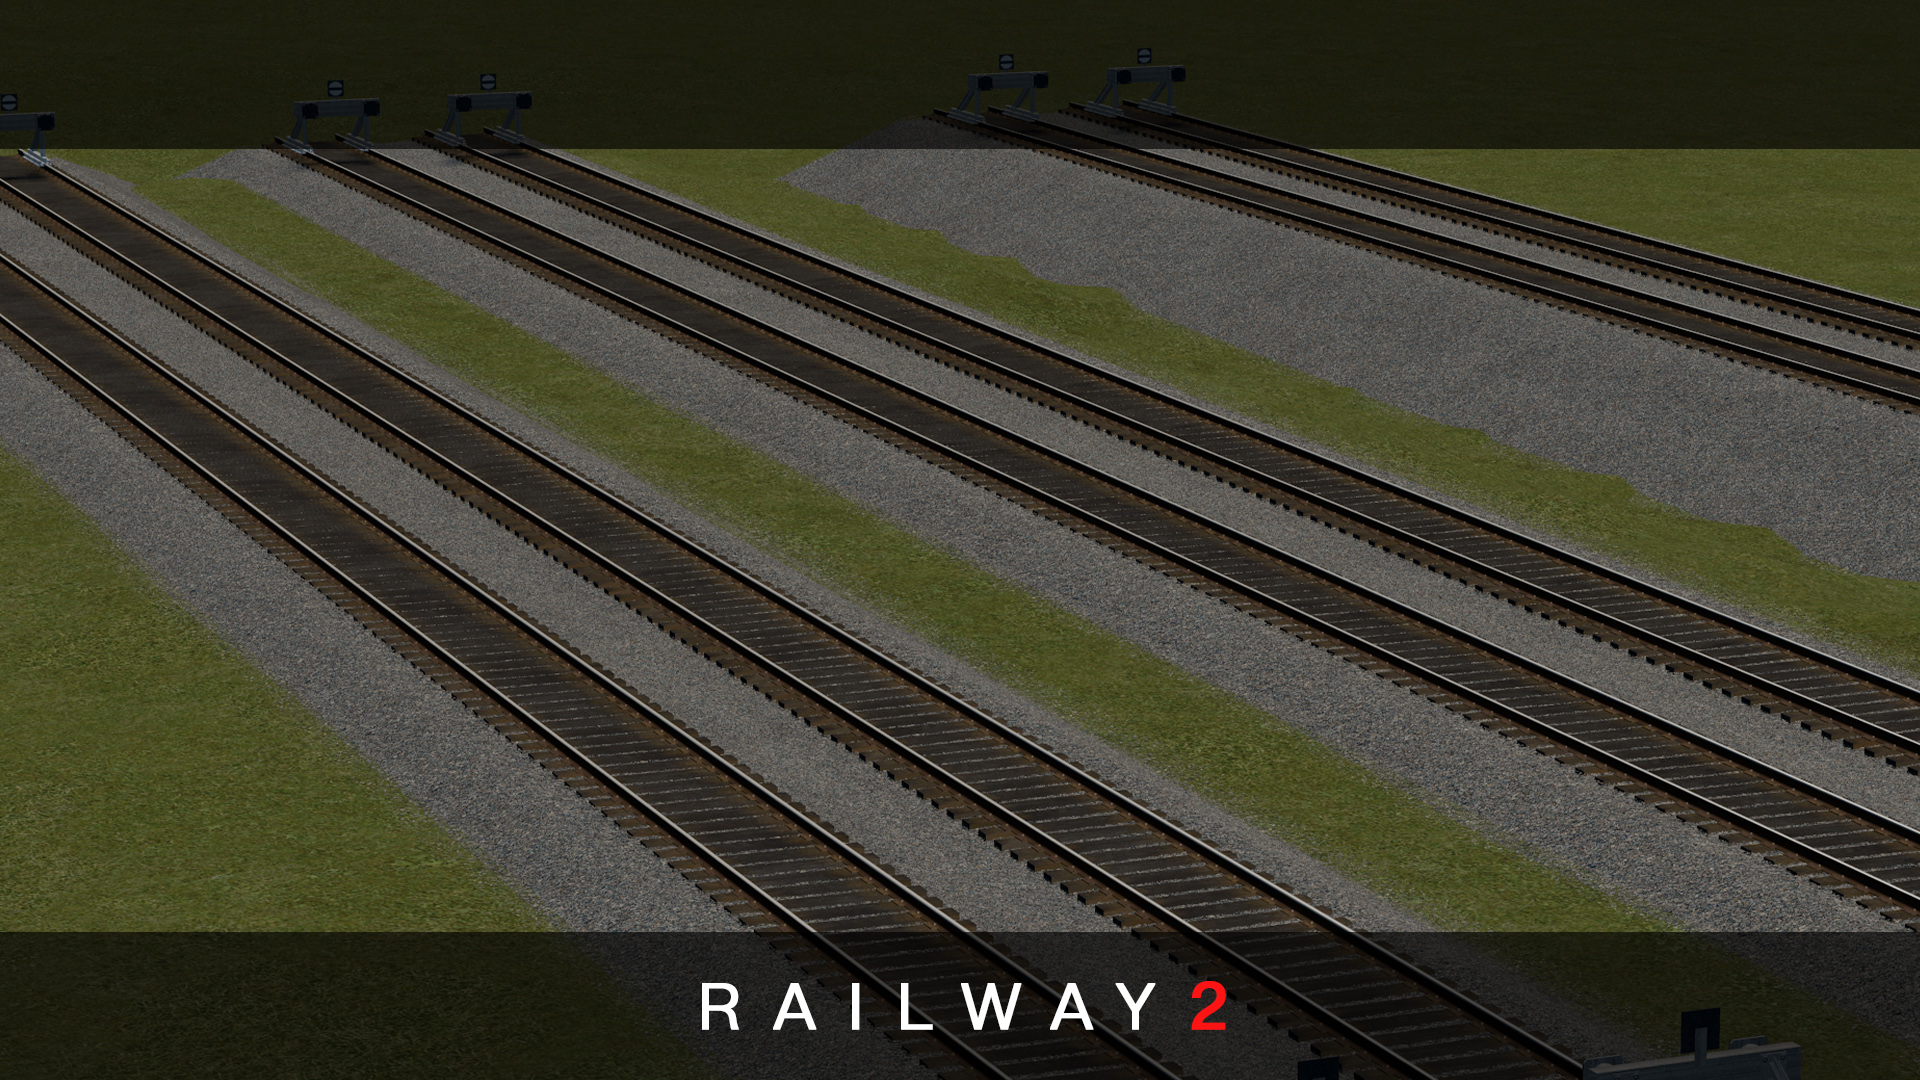 Cities: Skylines List of Railway 2 + Features + Modding Tutorial Information - 4.3 Networks: Types and Variants - 3C8DC1B